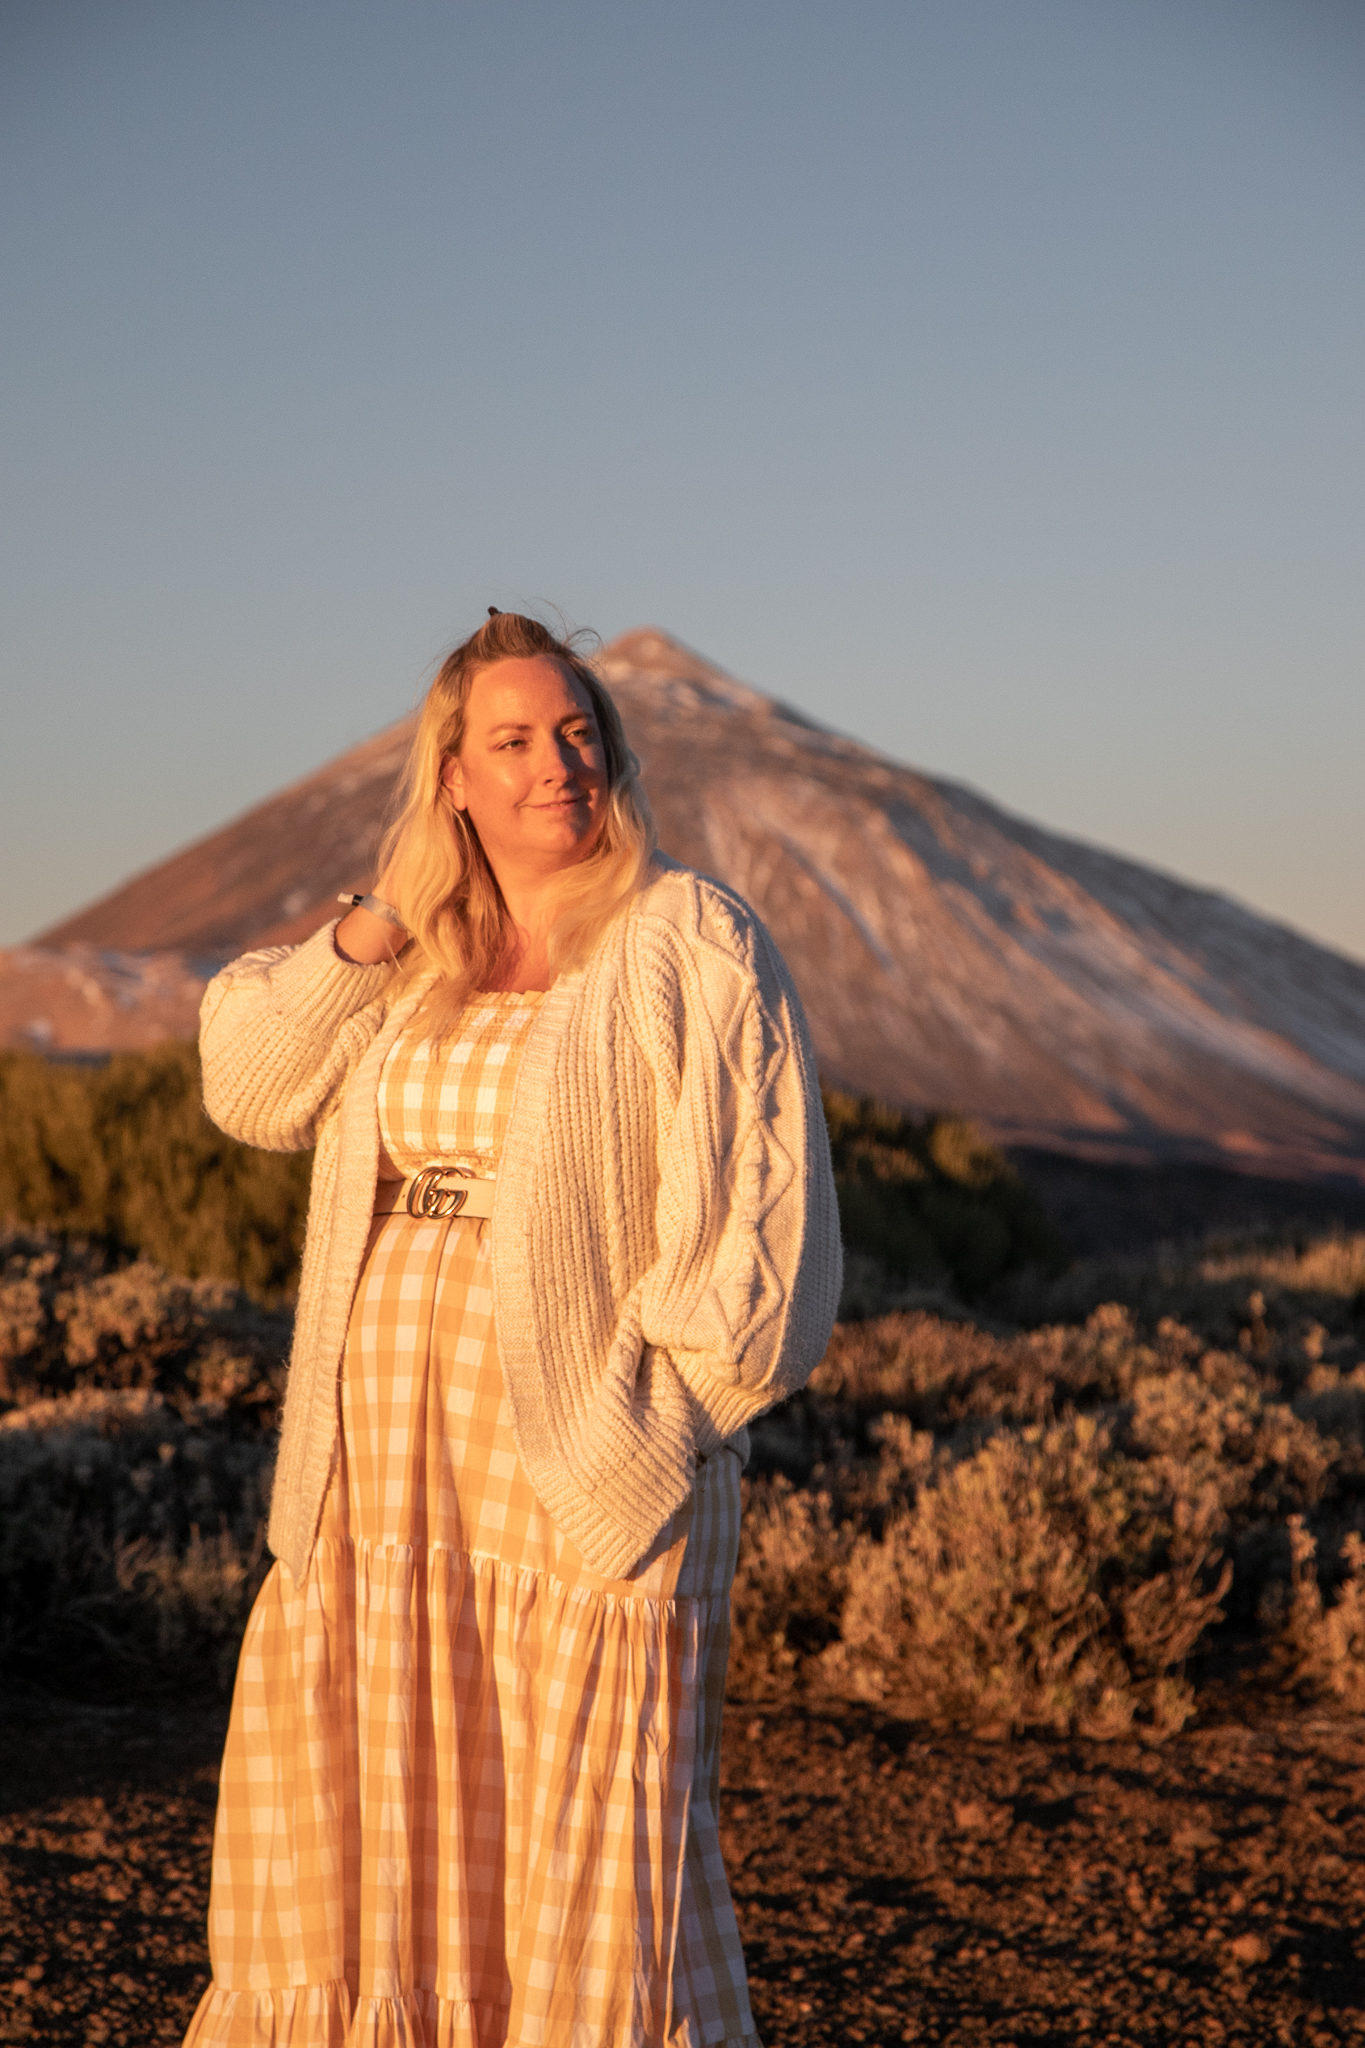 Lucy is stood with a yellow gingham dress and cream chunky cardigan on. The sun is shining on her and mount teide is in the background with snow on it